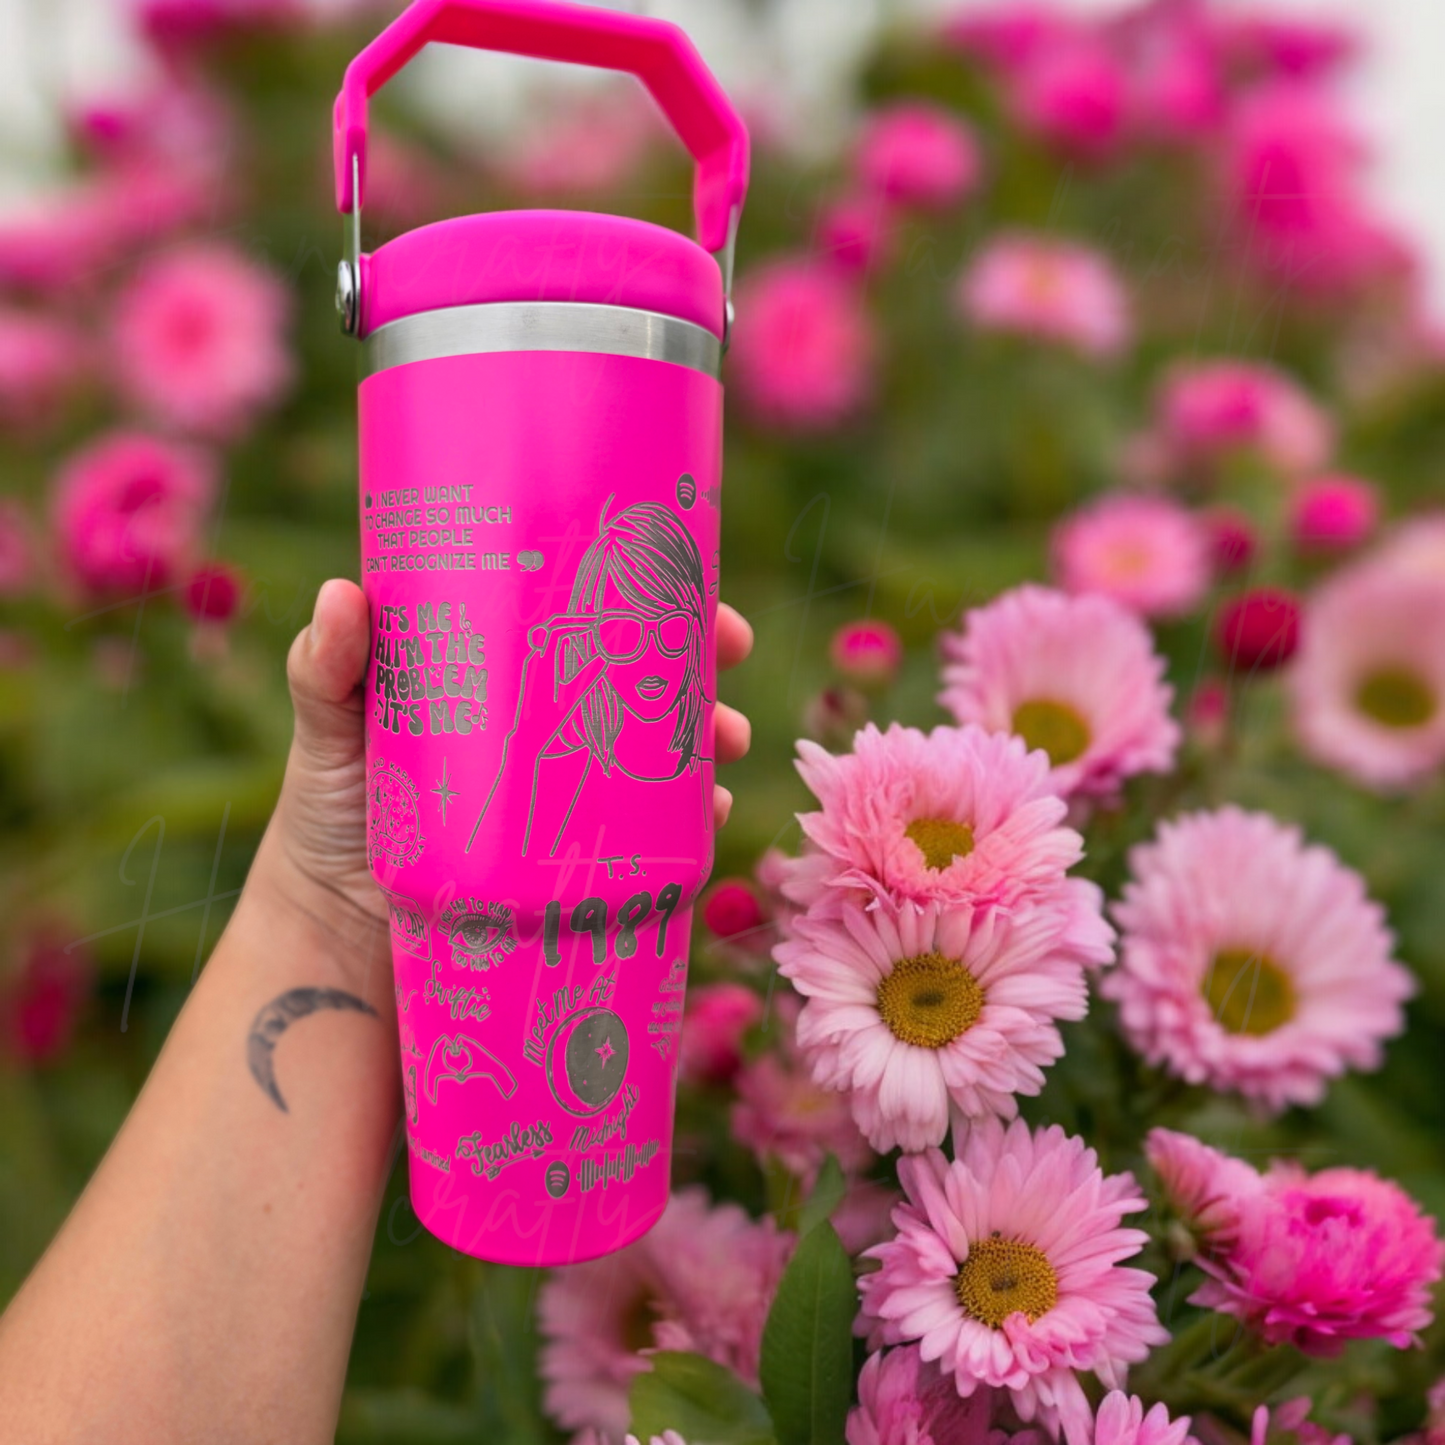 Swift-ie inspired stainless steel insulated laser engraved personalized flip straw water bottle, includes all albums